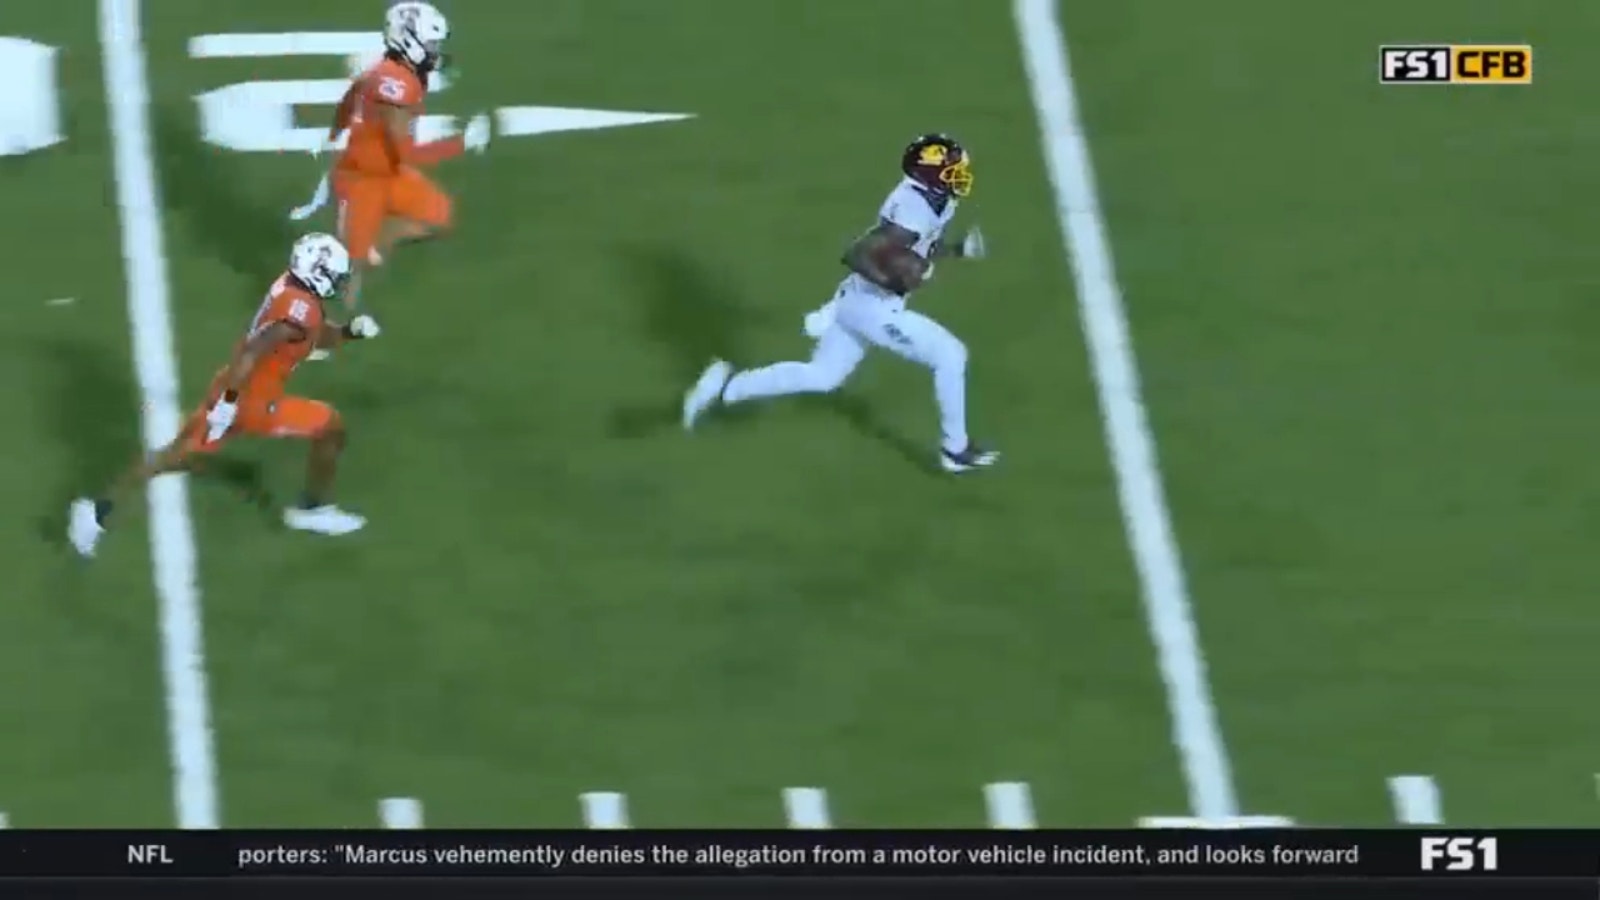 CMU's Daniel Richardson connects with Jalen McGaughy for 54-yard TD